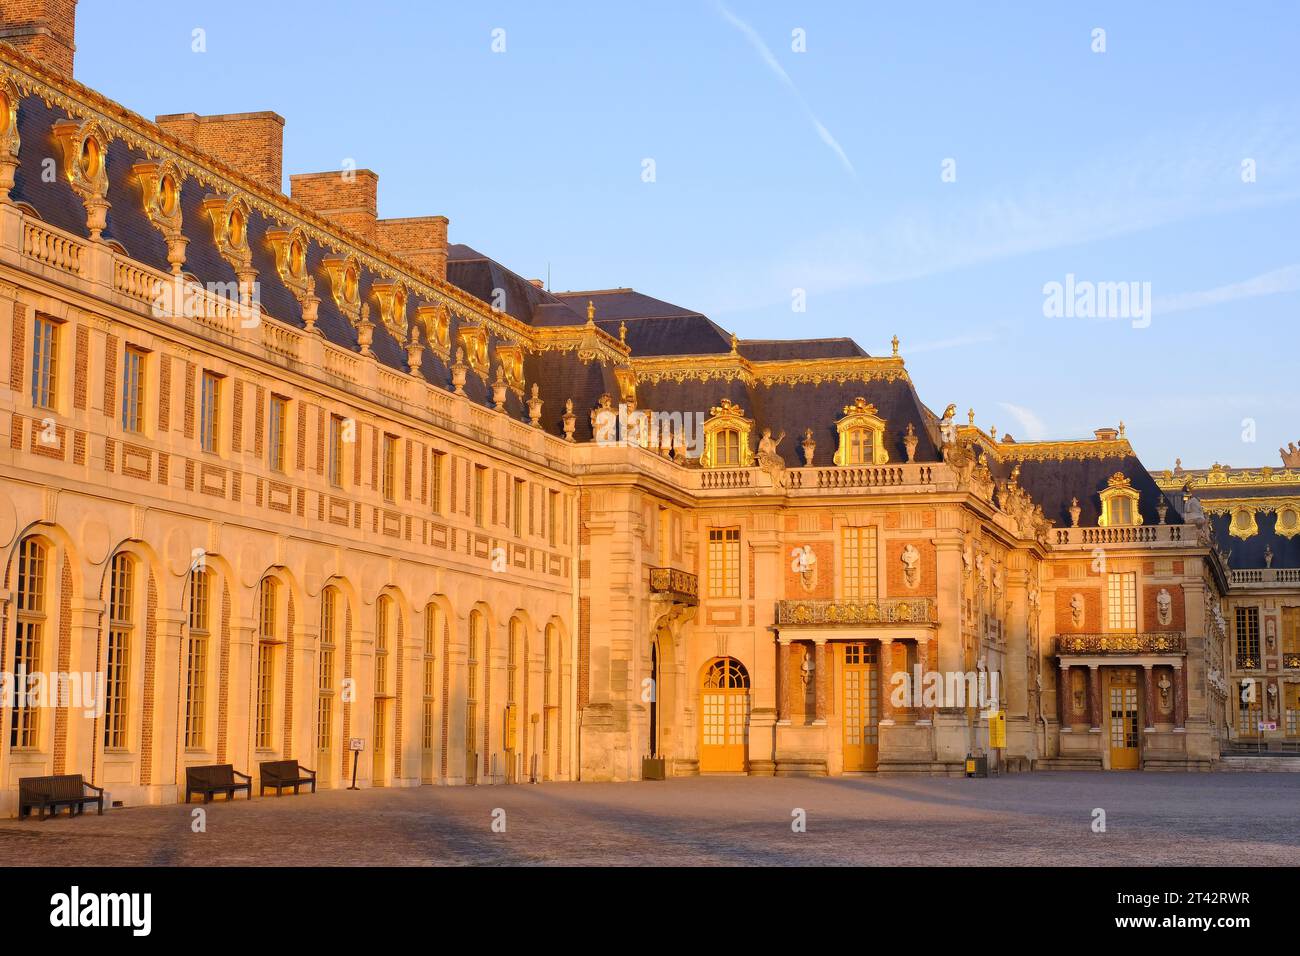 Versailles: Front face (East façade and courtyard) of the palace glowing orange just after sunrise at Versailles, Ile-de-France, France Stock Photo